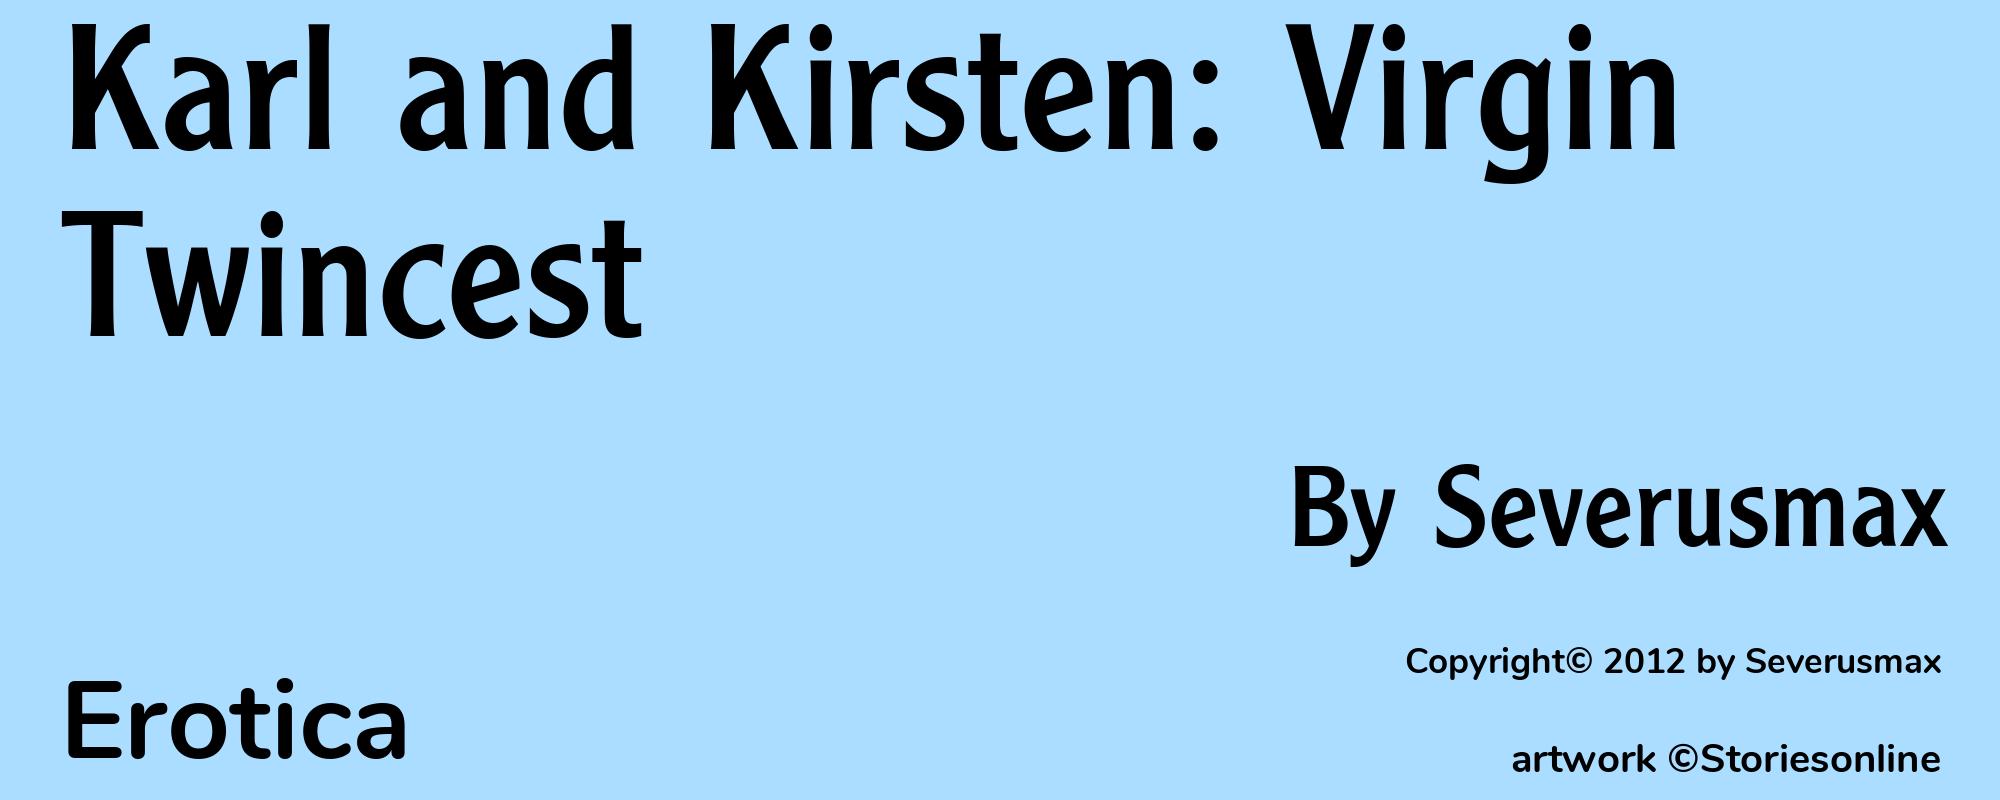 Karl and Kirsten: Virgin Twincest - Cover